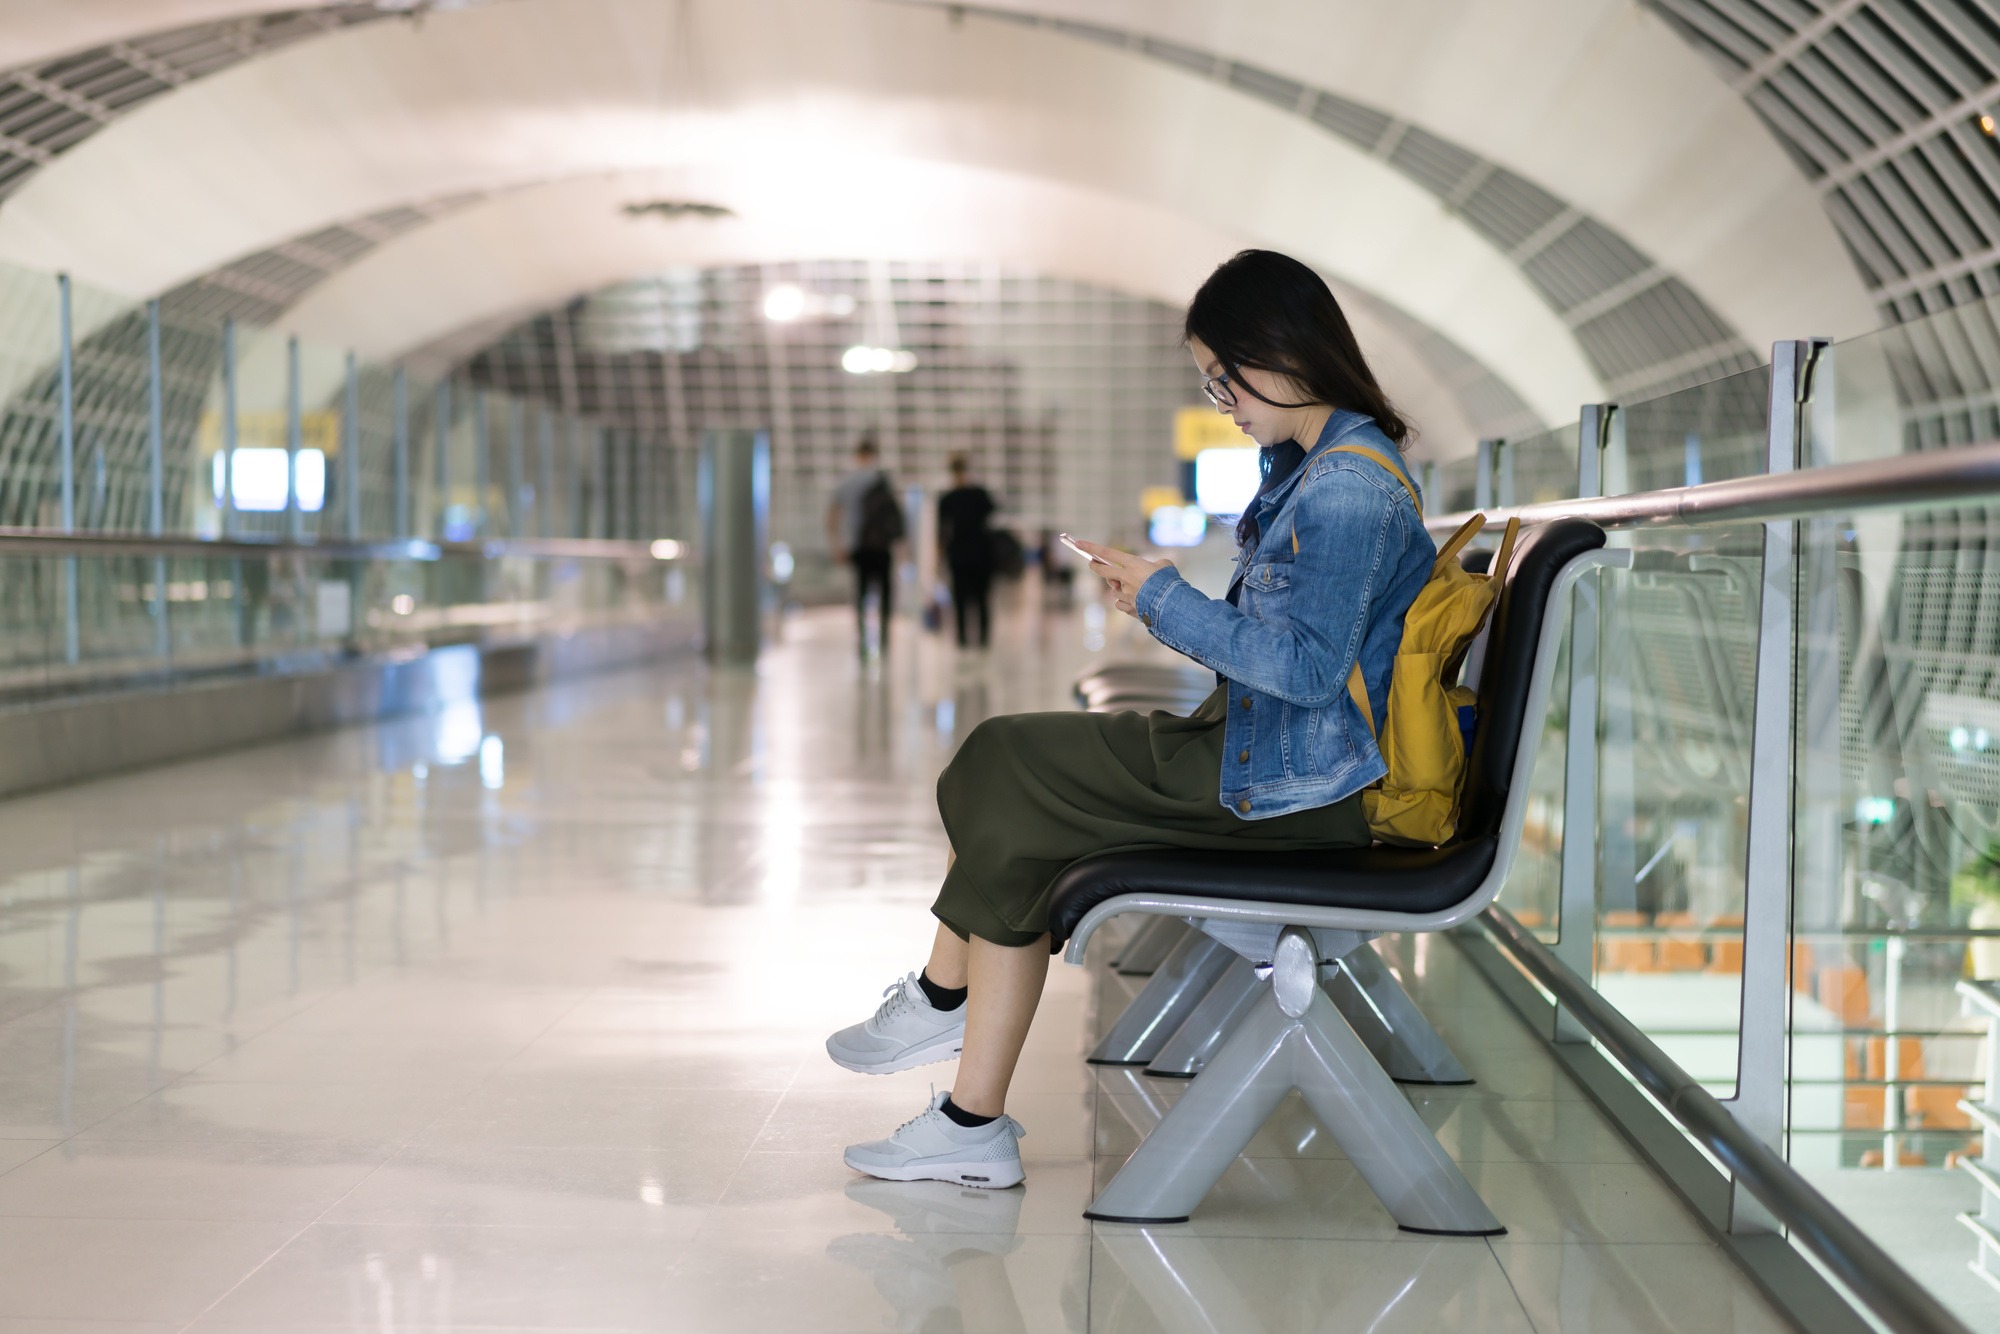 5 Easy Ways to Kill Time at an Airport - Icetruck.tv